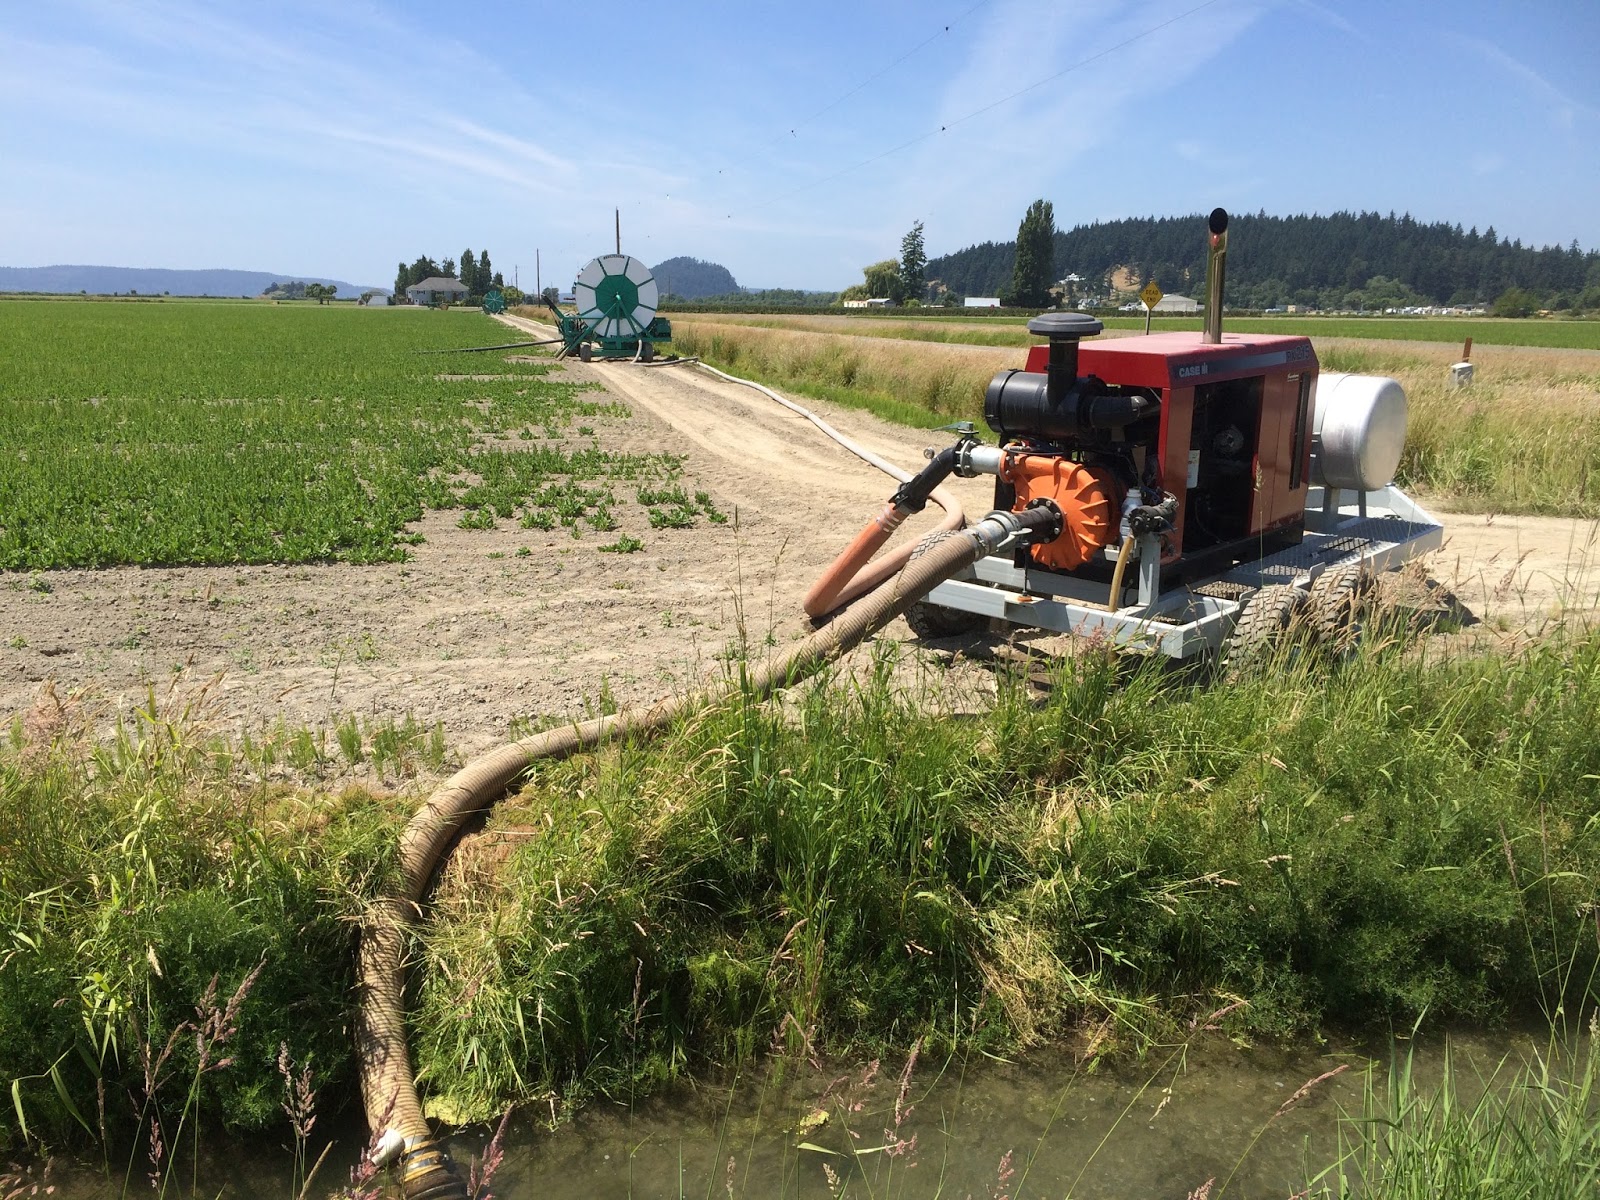 Irrigation ditch in bottom of photo, hose stretches to various machines along a large crop field.